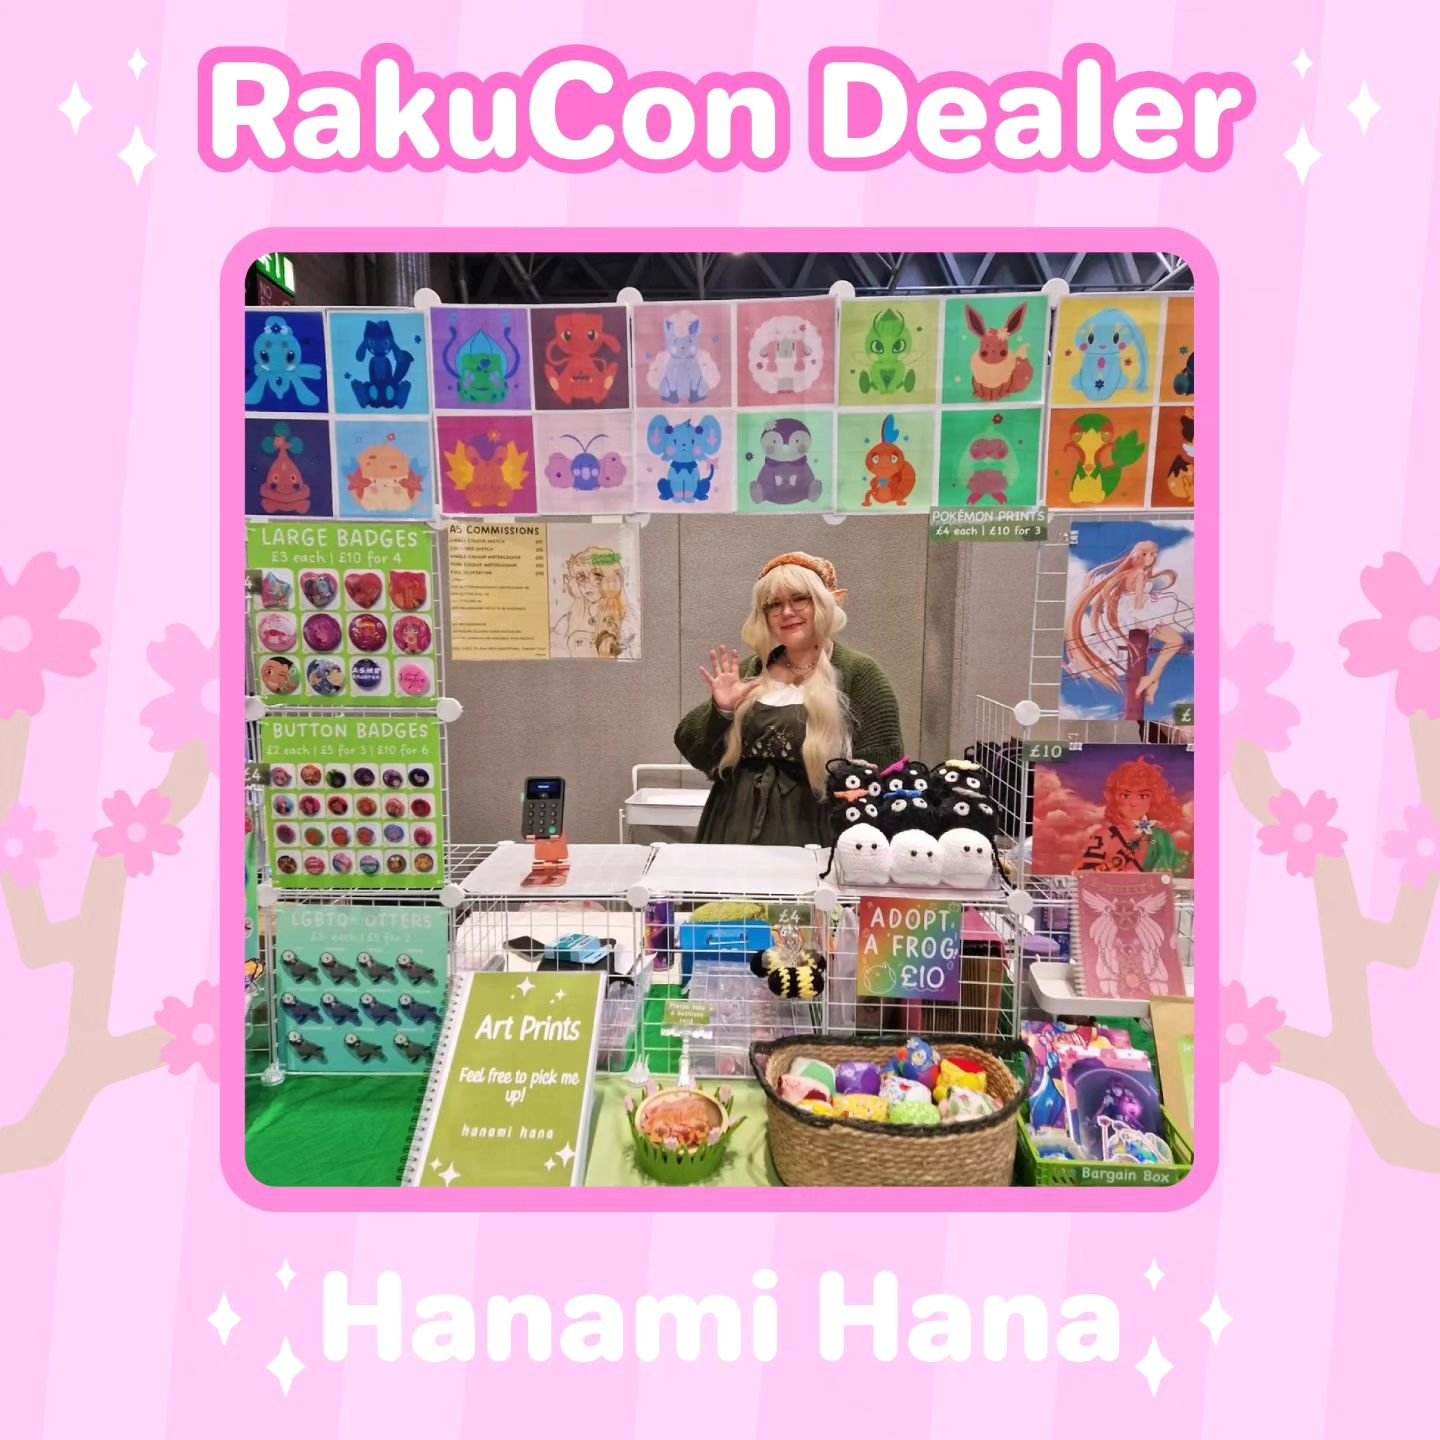 We're delighted to welcome back @hanami.hana to RakuCon! 🌸 They sell a wonderful variety of prints, badges, acrylic charms and more! 💕 Swipe across to check out their lovely work! 🩷

#animeconvention #ukconvention #convention #comiccon #rakucon